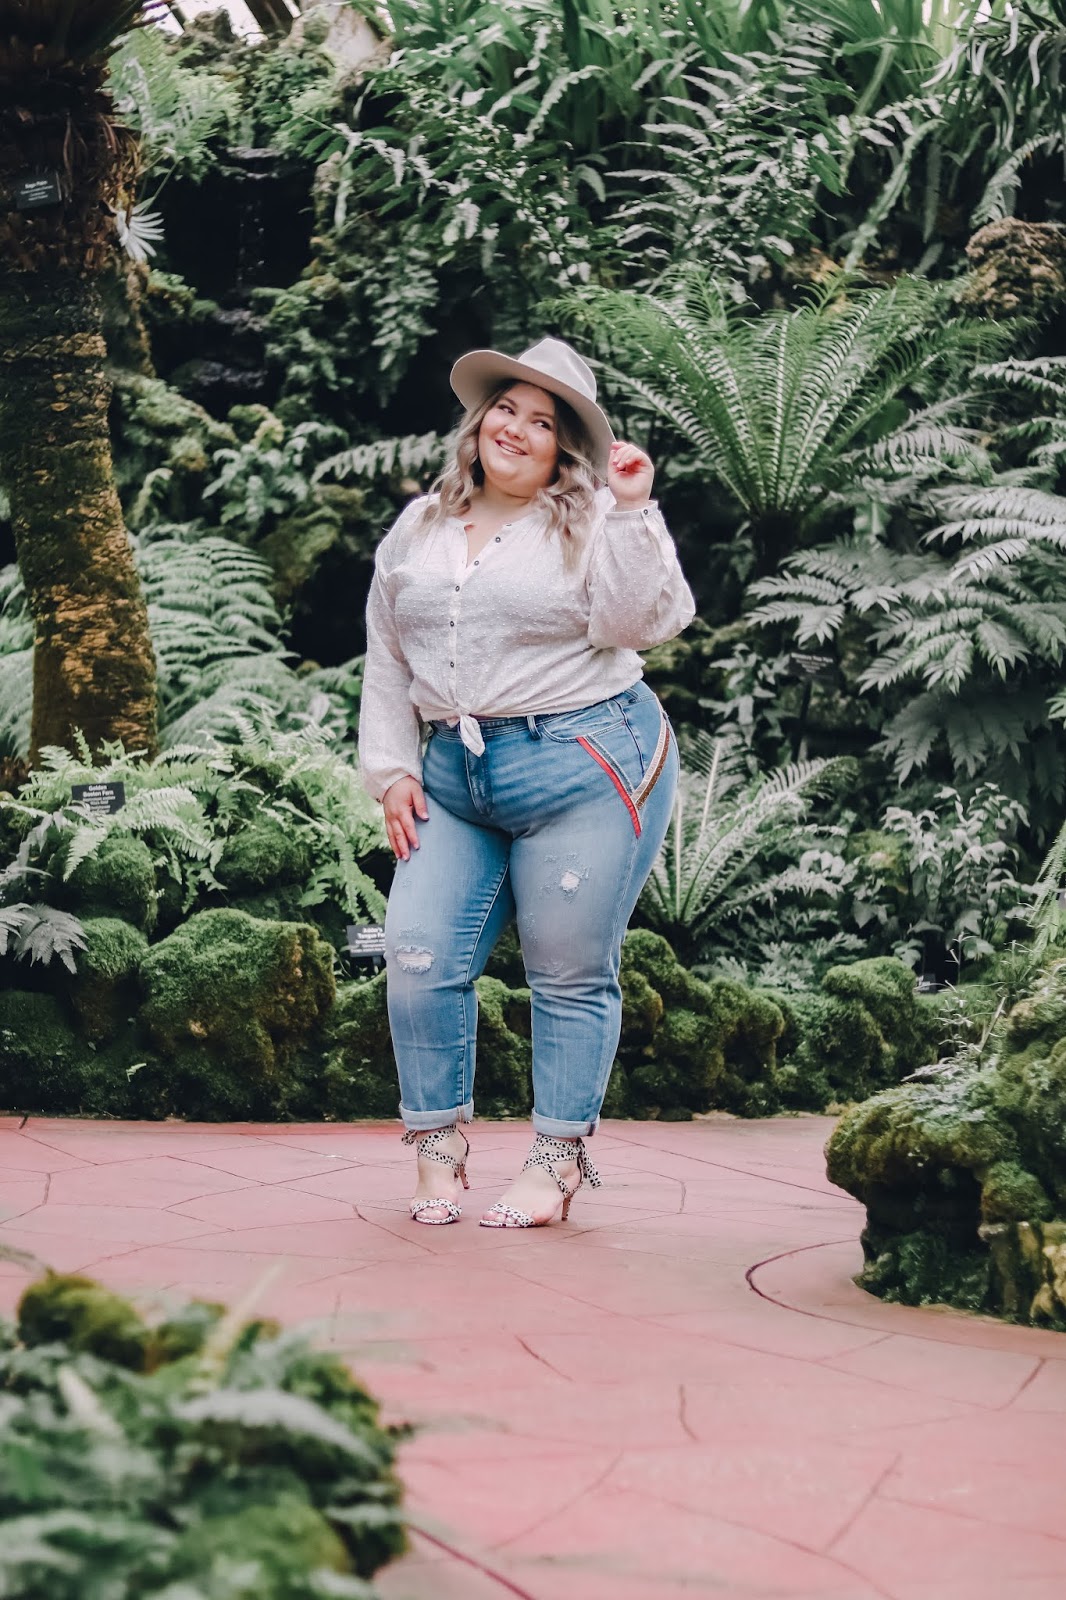 Chicago Plus Size Petite Fashion Blogger, influencer, YouTuber, and model Natalie Craig, of Natalie in the City, reviews Anthropologie's denim, blouses, hats, and heels.